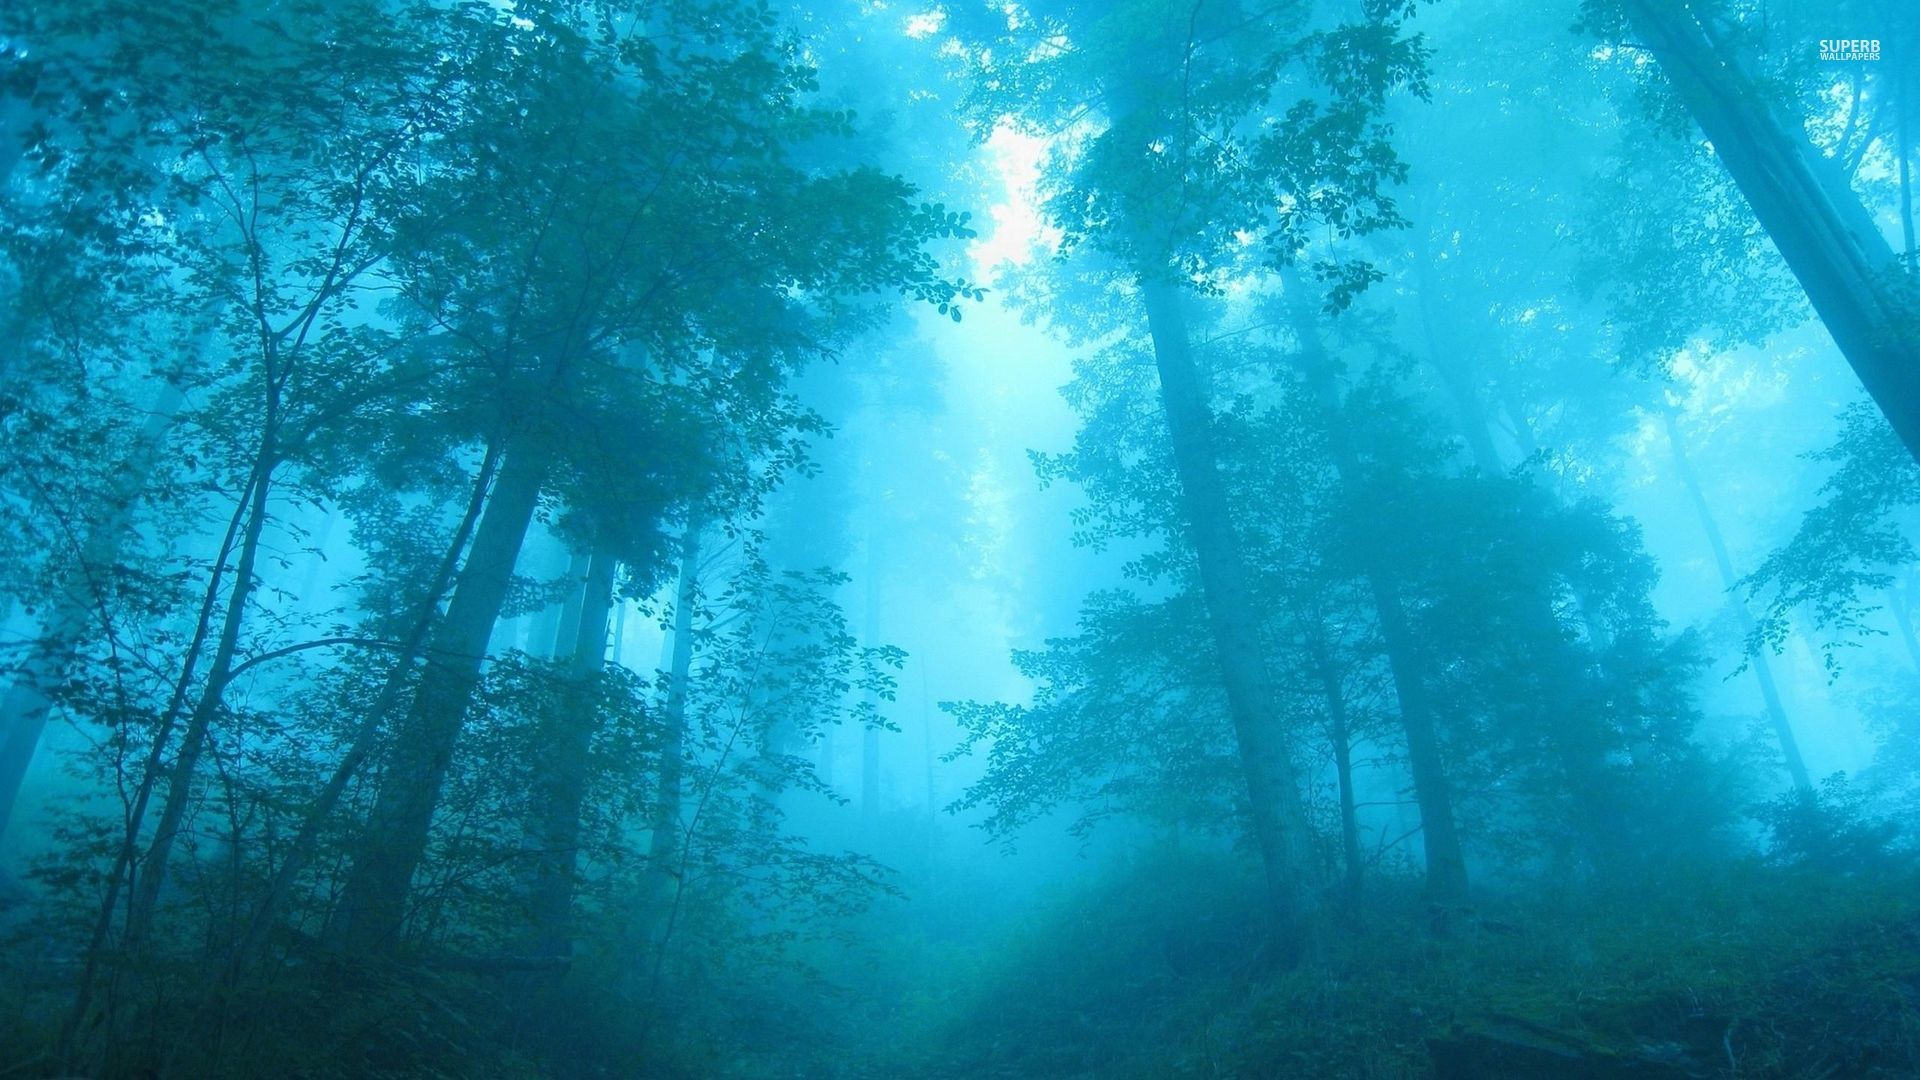 General 1920x1080 forest trees mist nature cyan